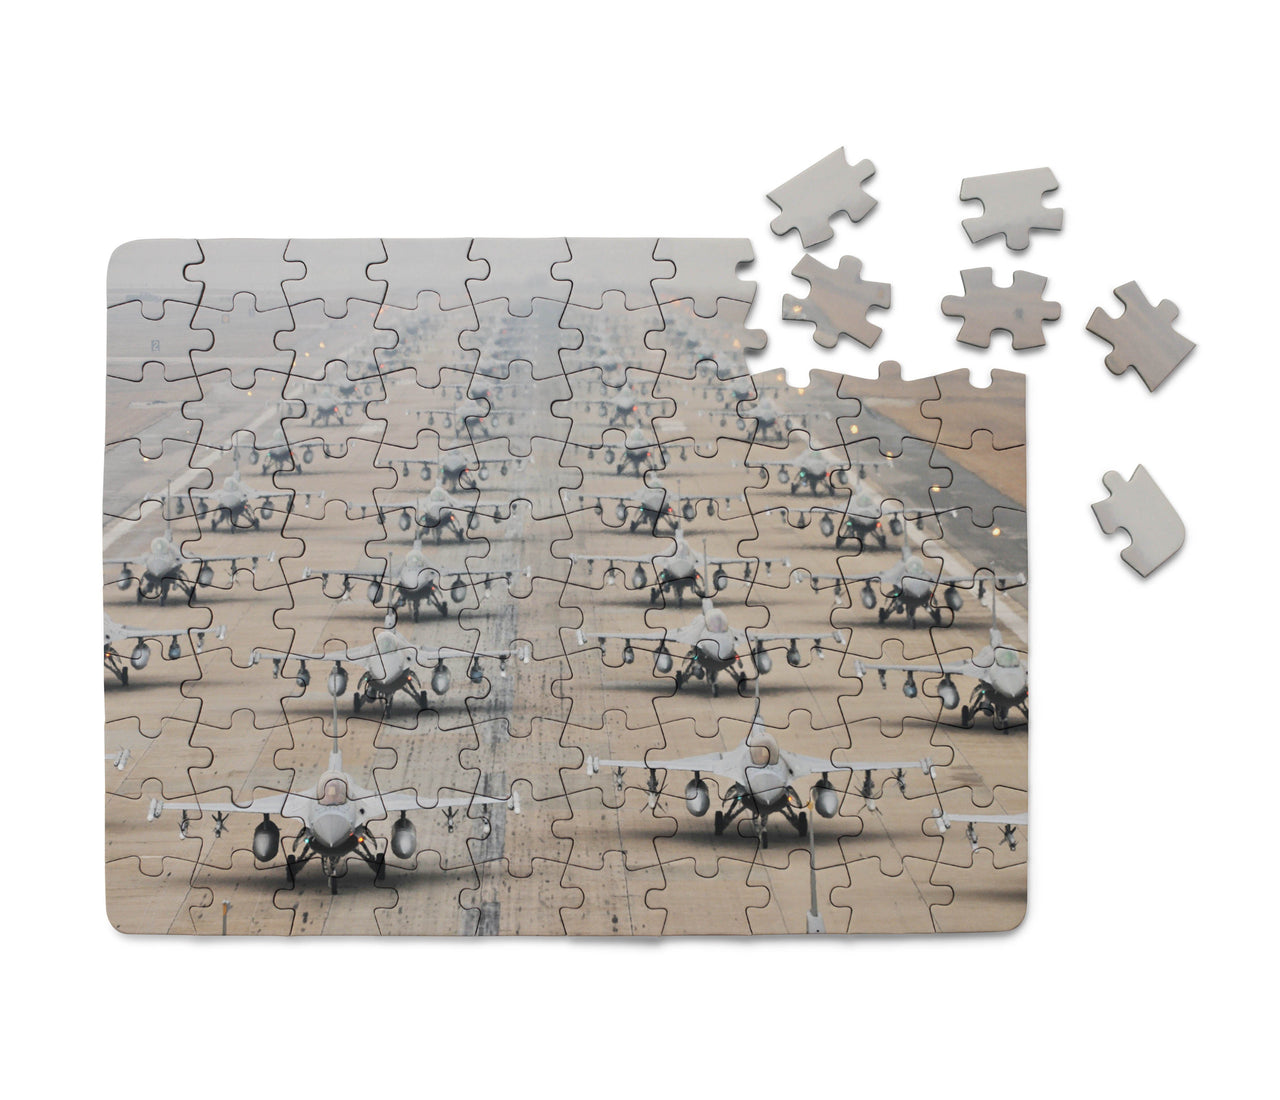 Military Jets Printed Puzzles Aviation Shop 